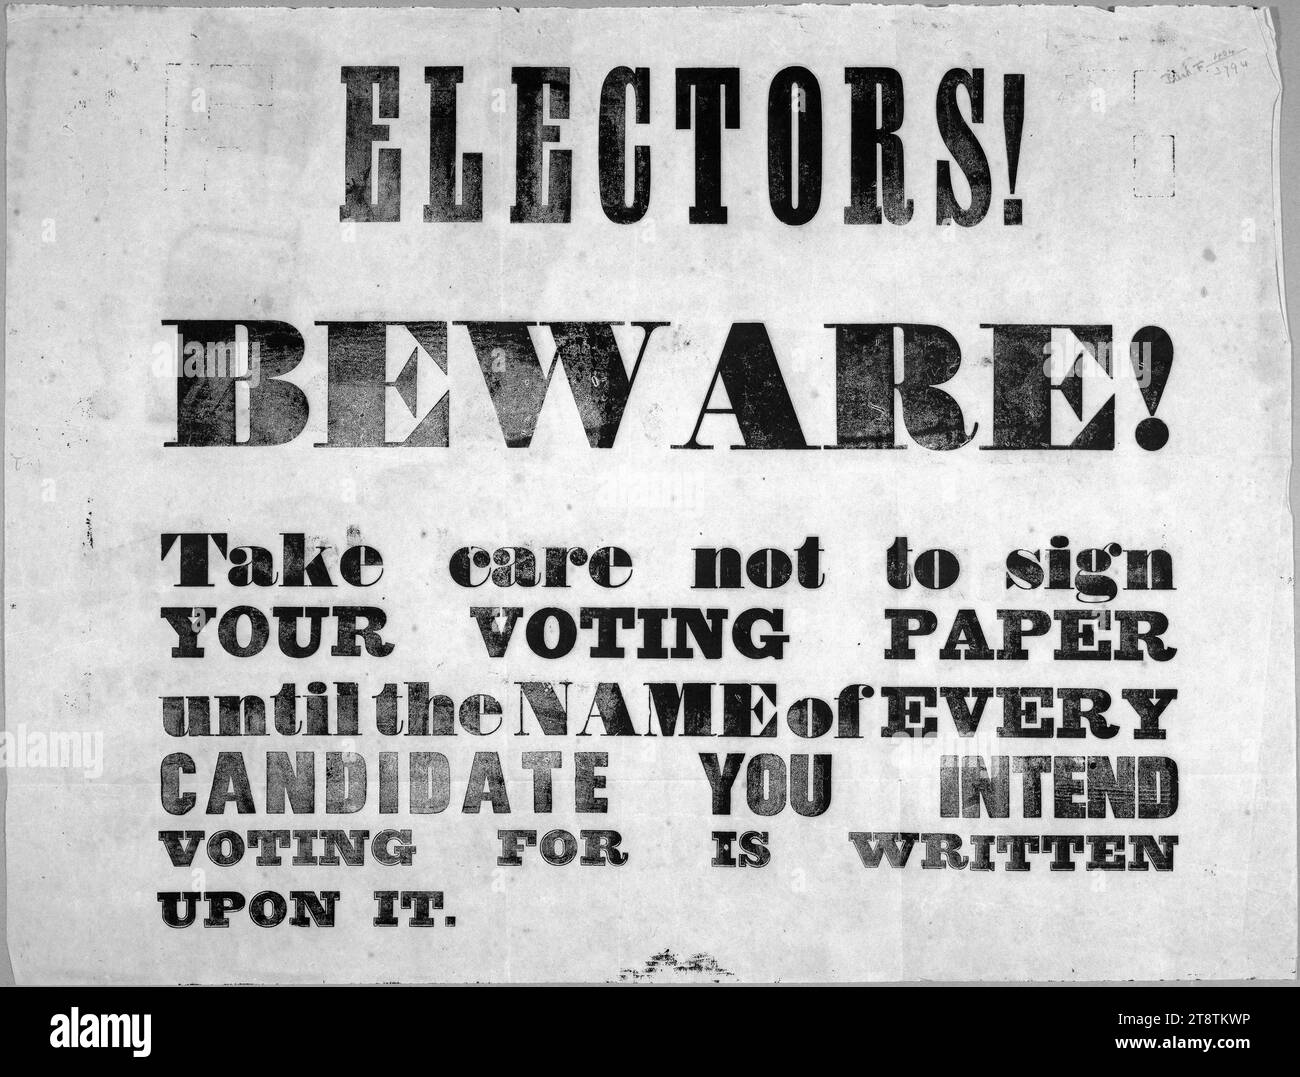 Electors! Beware! Take care not to sign your voting paper until the name of every candidate you intend voting for is written upon it. 1853, Arrangement of text Stock Photo